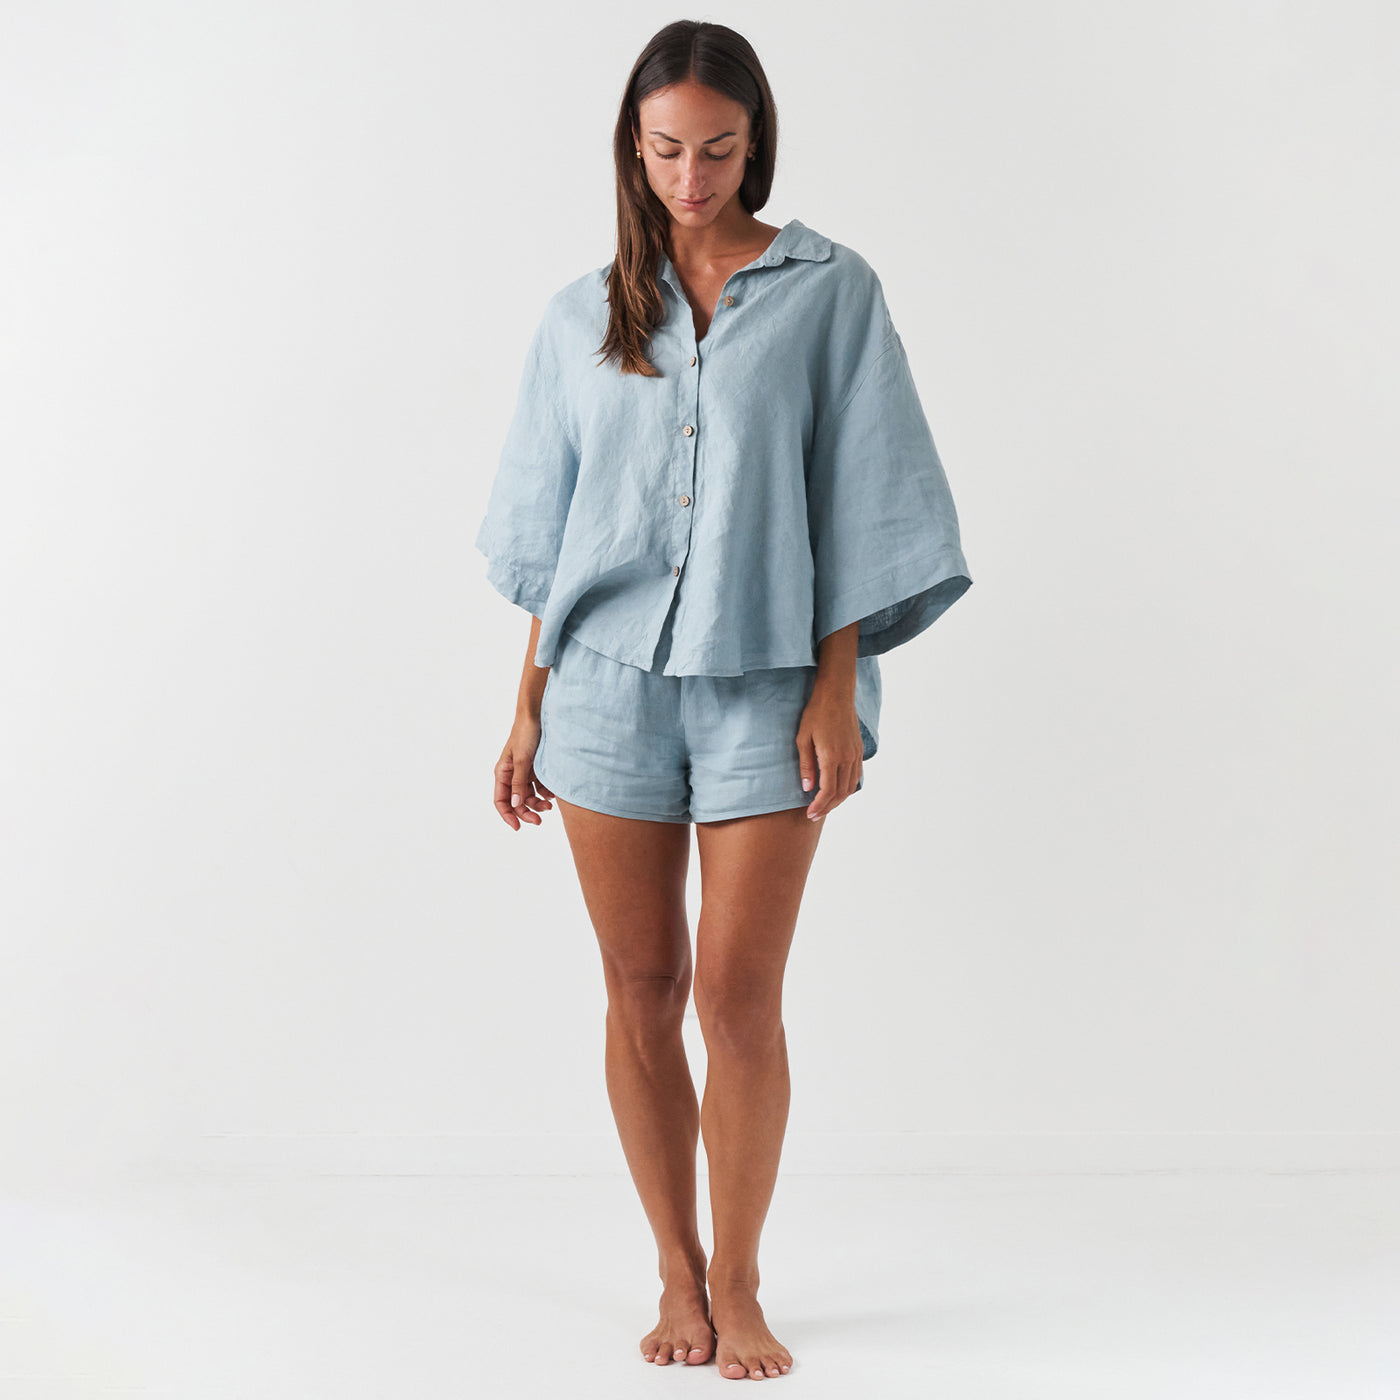 French Flax Linen Relaxed Short in Marine Blue